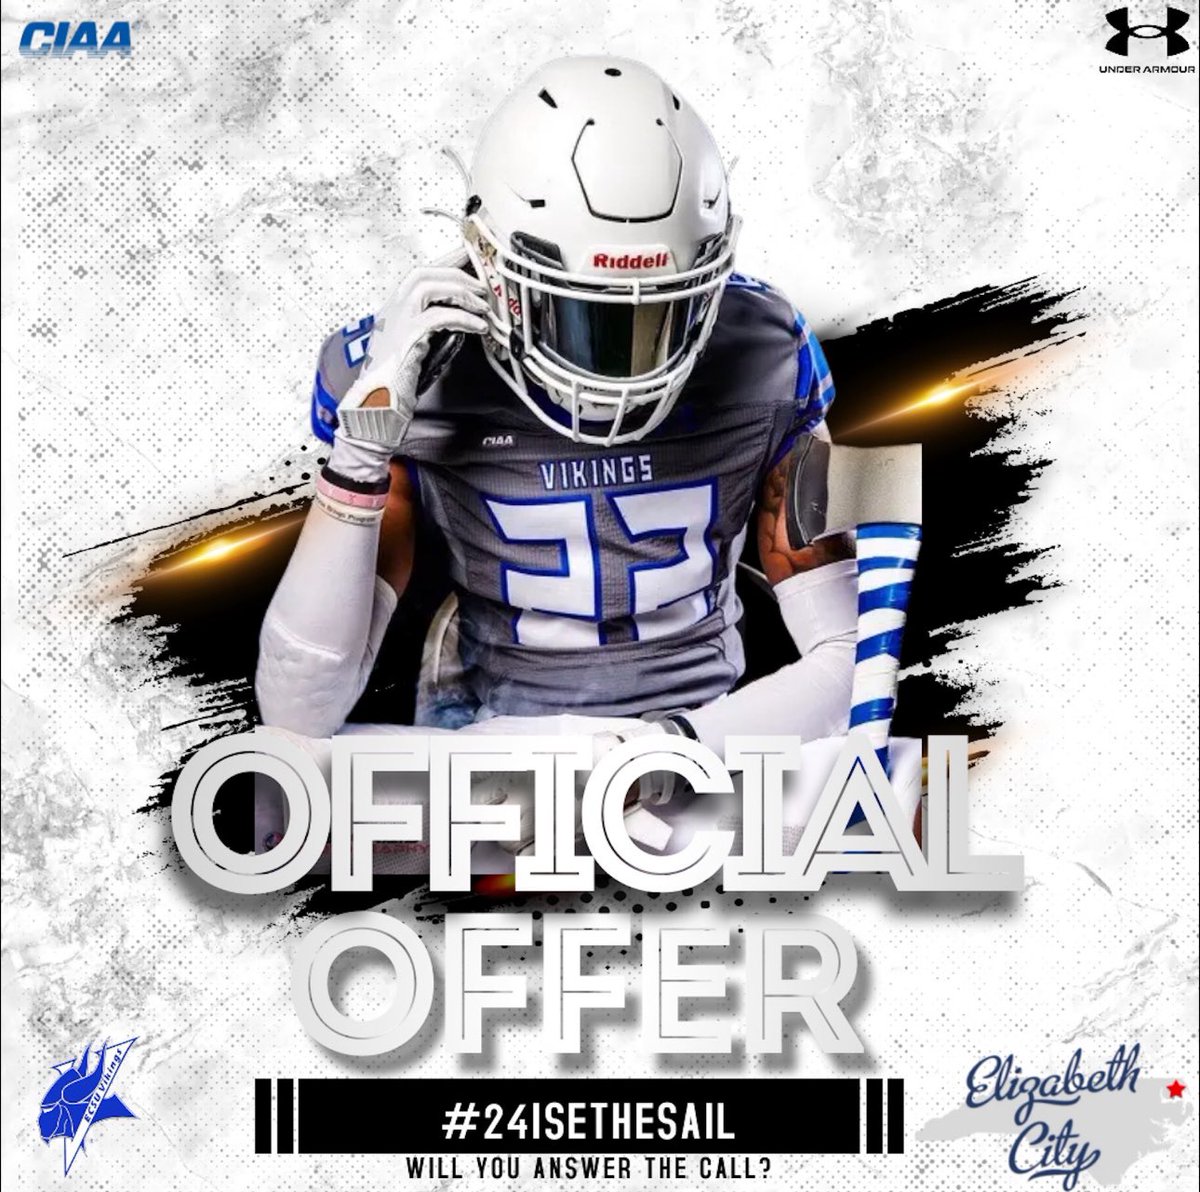 After a great call, I’m blessed to
receive my first offer from ECSU